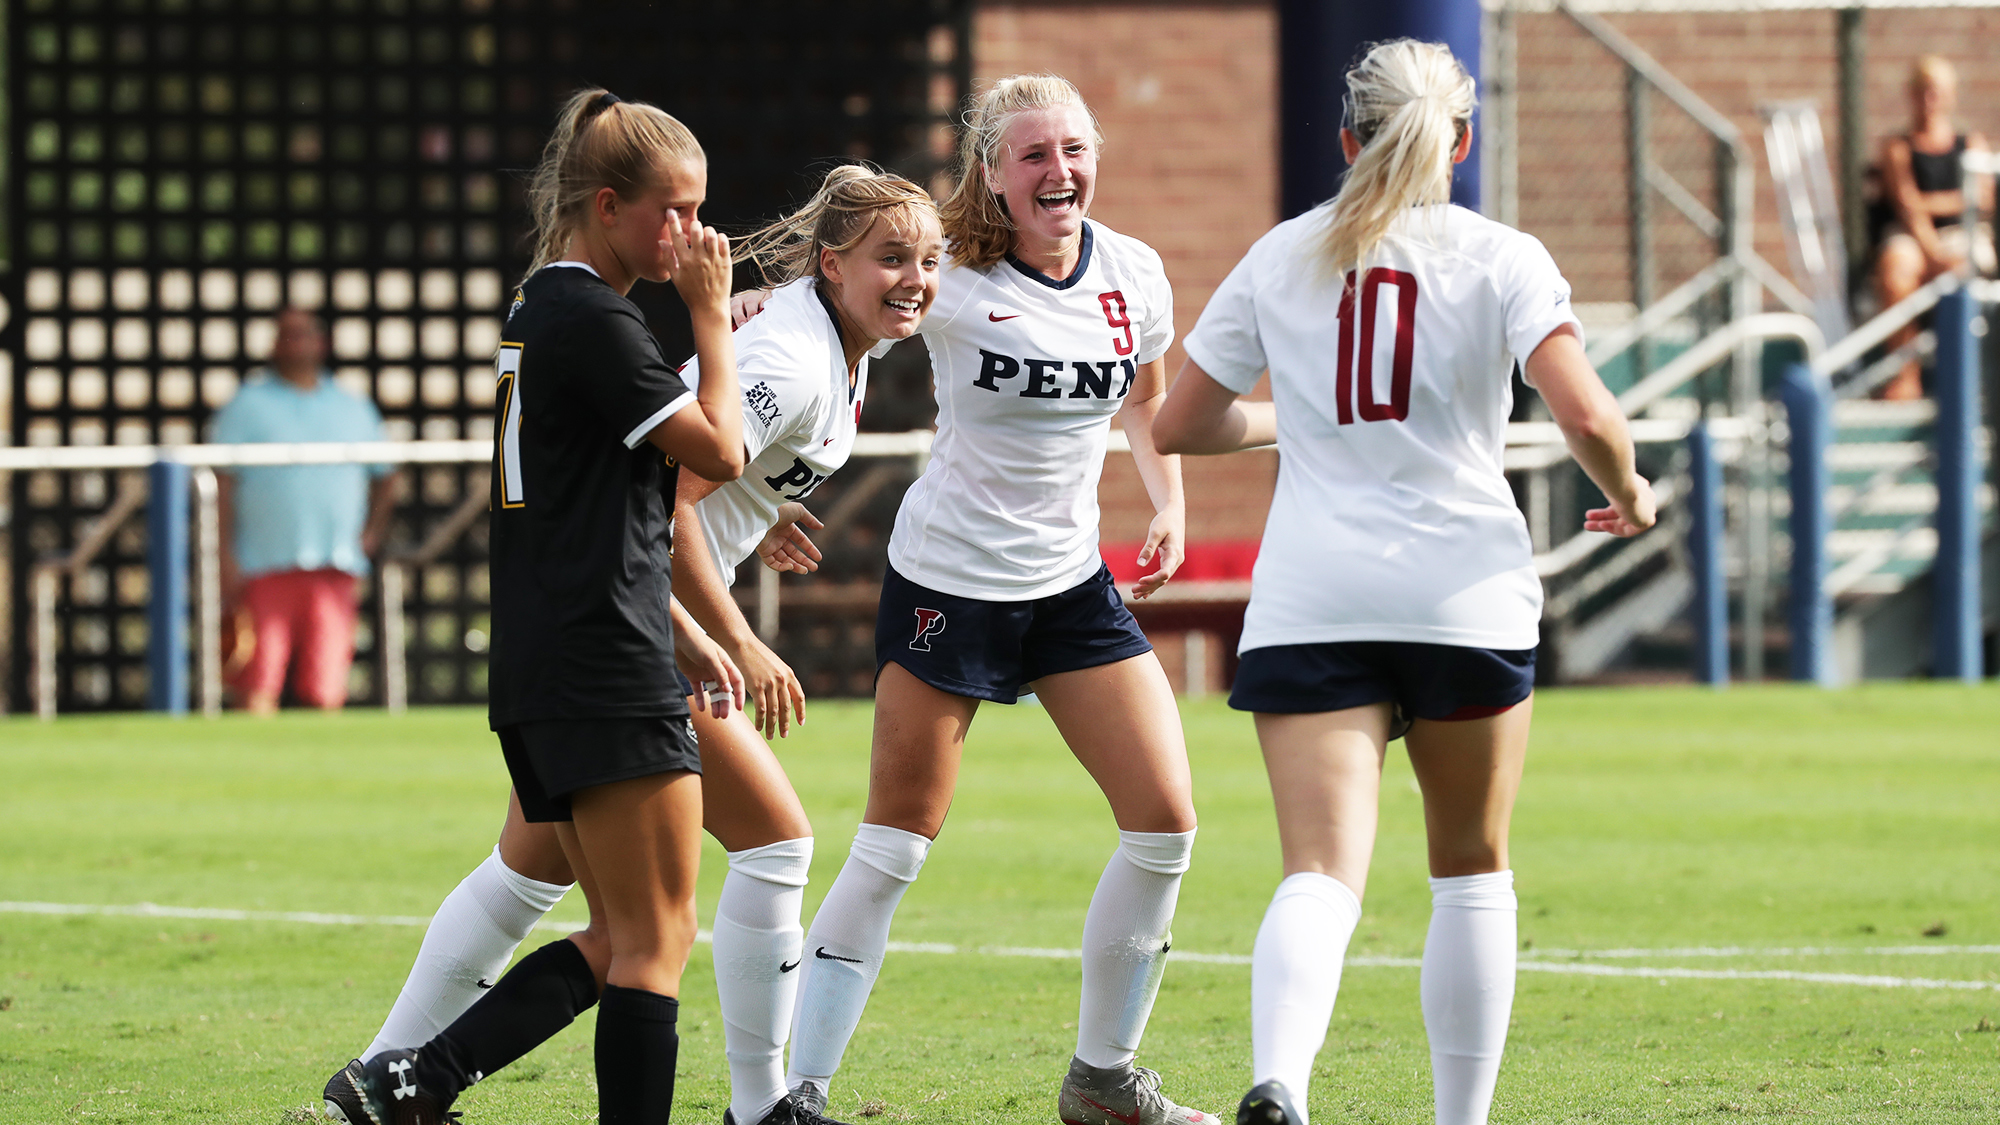 Three Penn women's soccer players celebrate on the field against Towson.